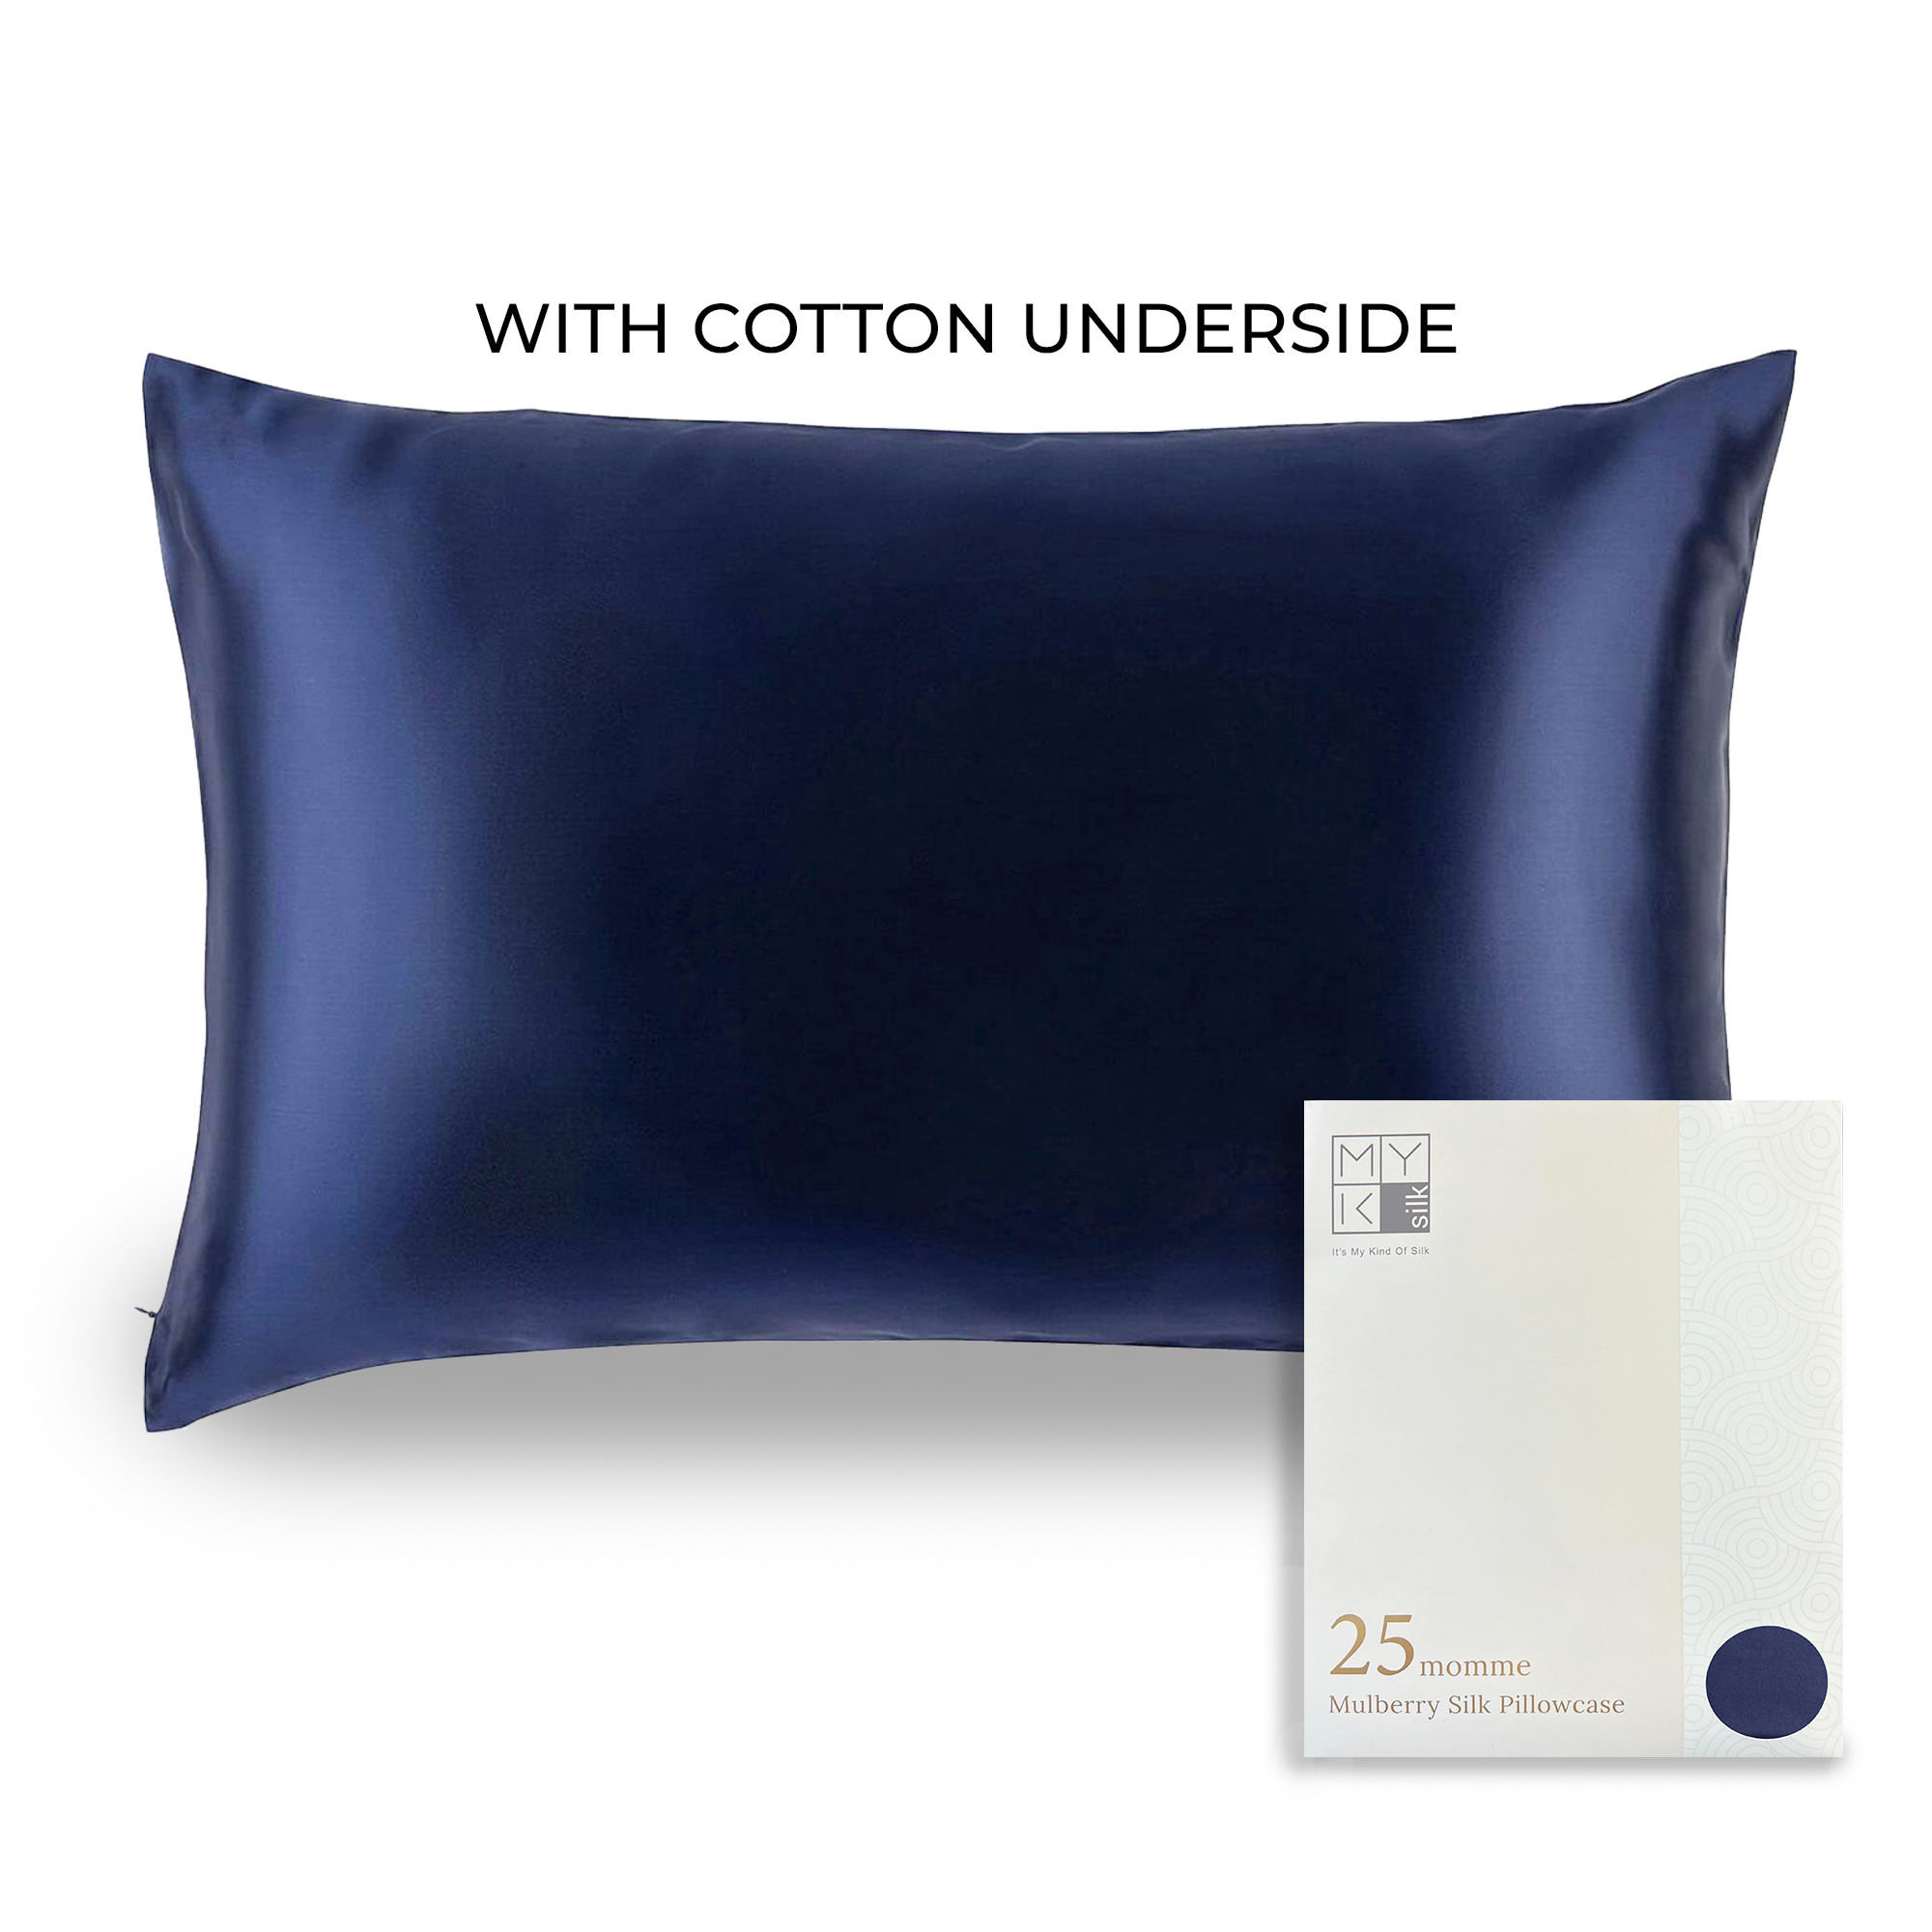 Products Luxury Mulberry Silk Pillowcase with Cotton Underside (25 momme) - MYK Silk #color_navy blue